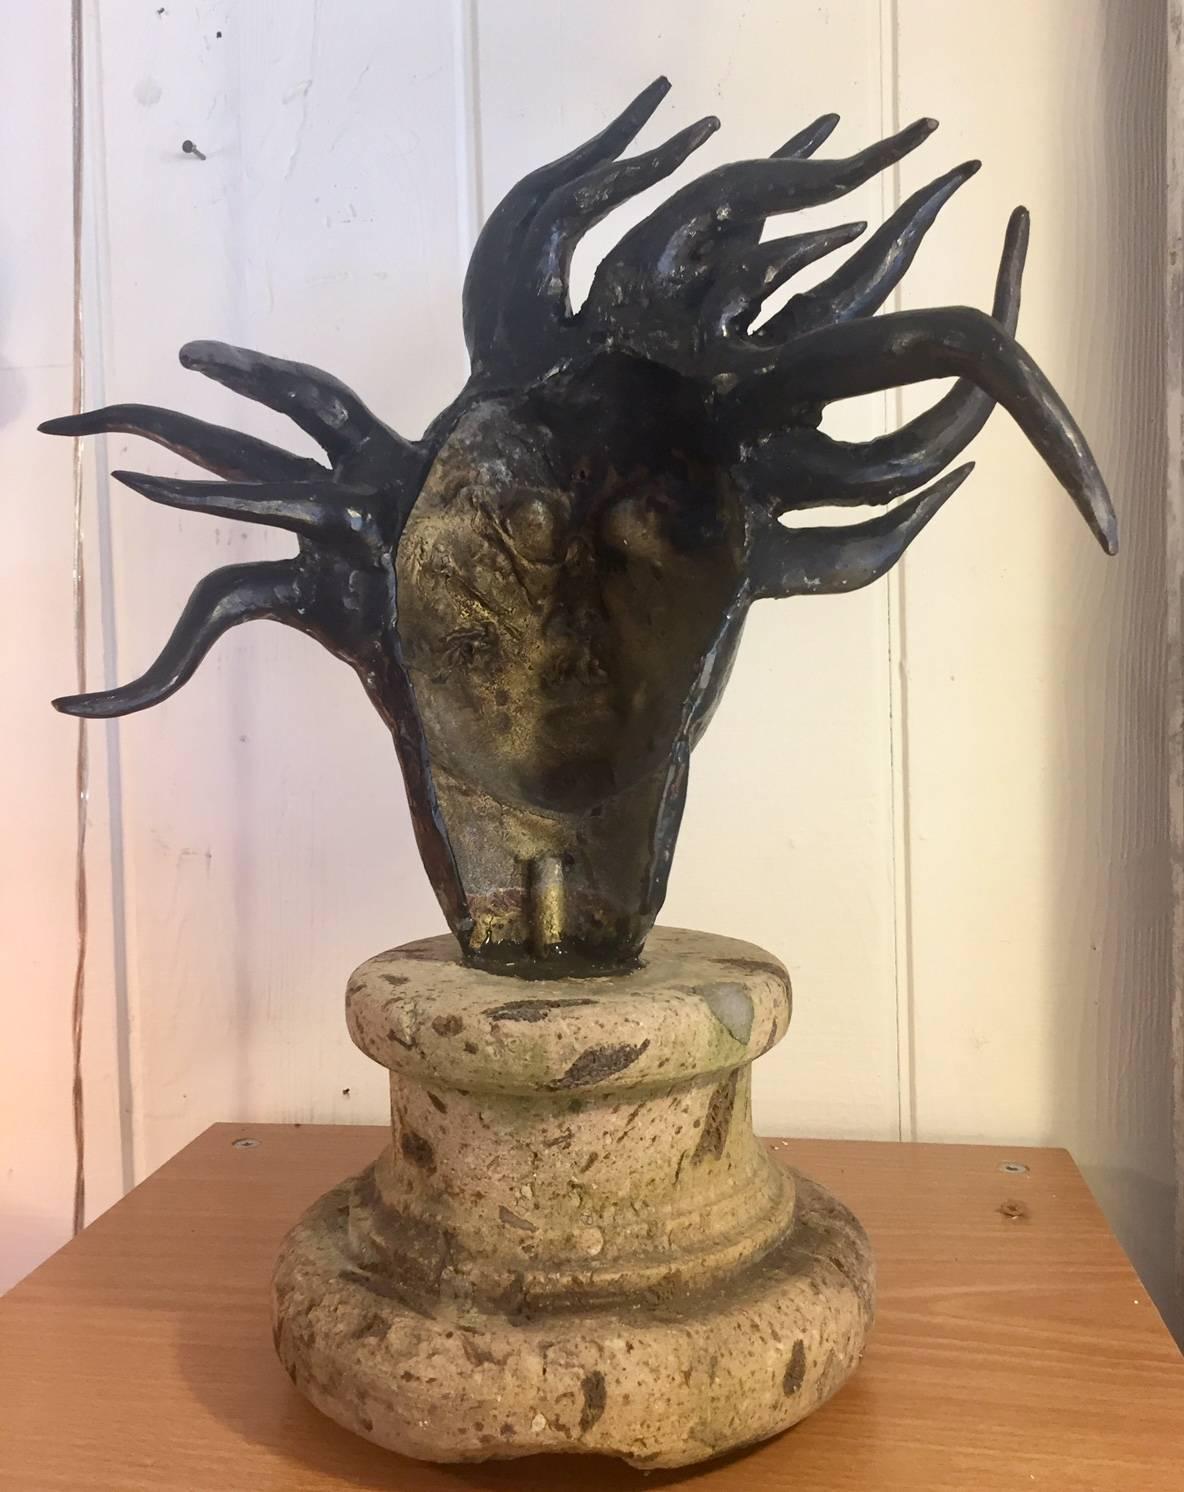 Eye catching sculpture of a face that has a powerful mythical feel,...possibly Medusa, mounted on a stone base.
Measures: Base:
8